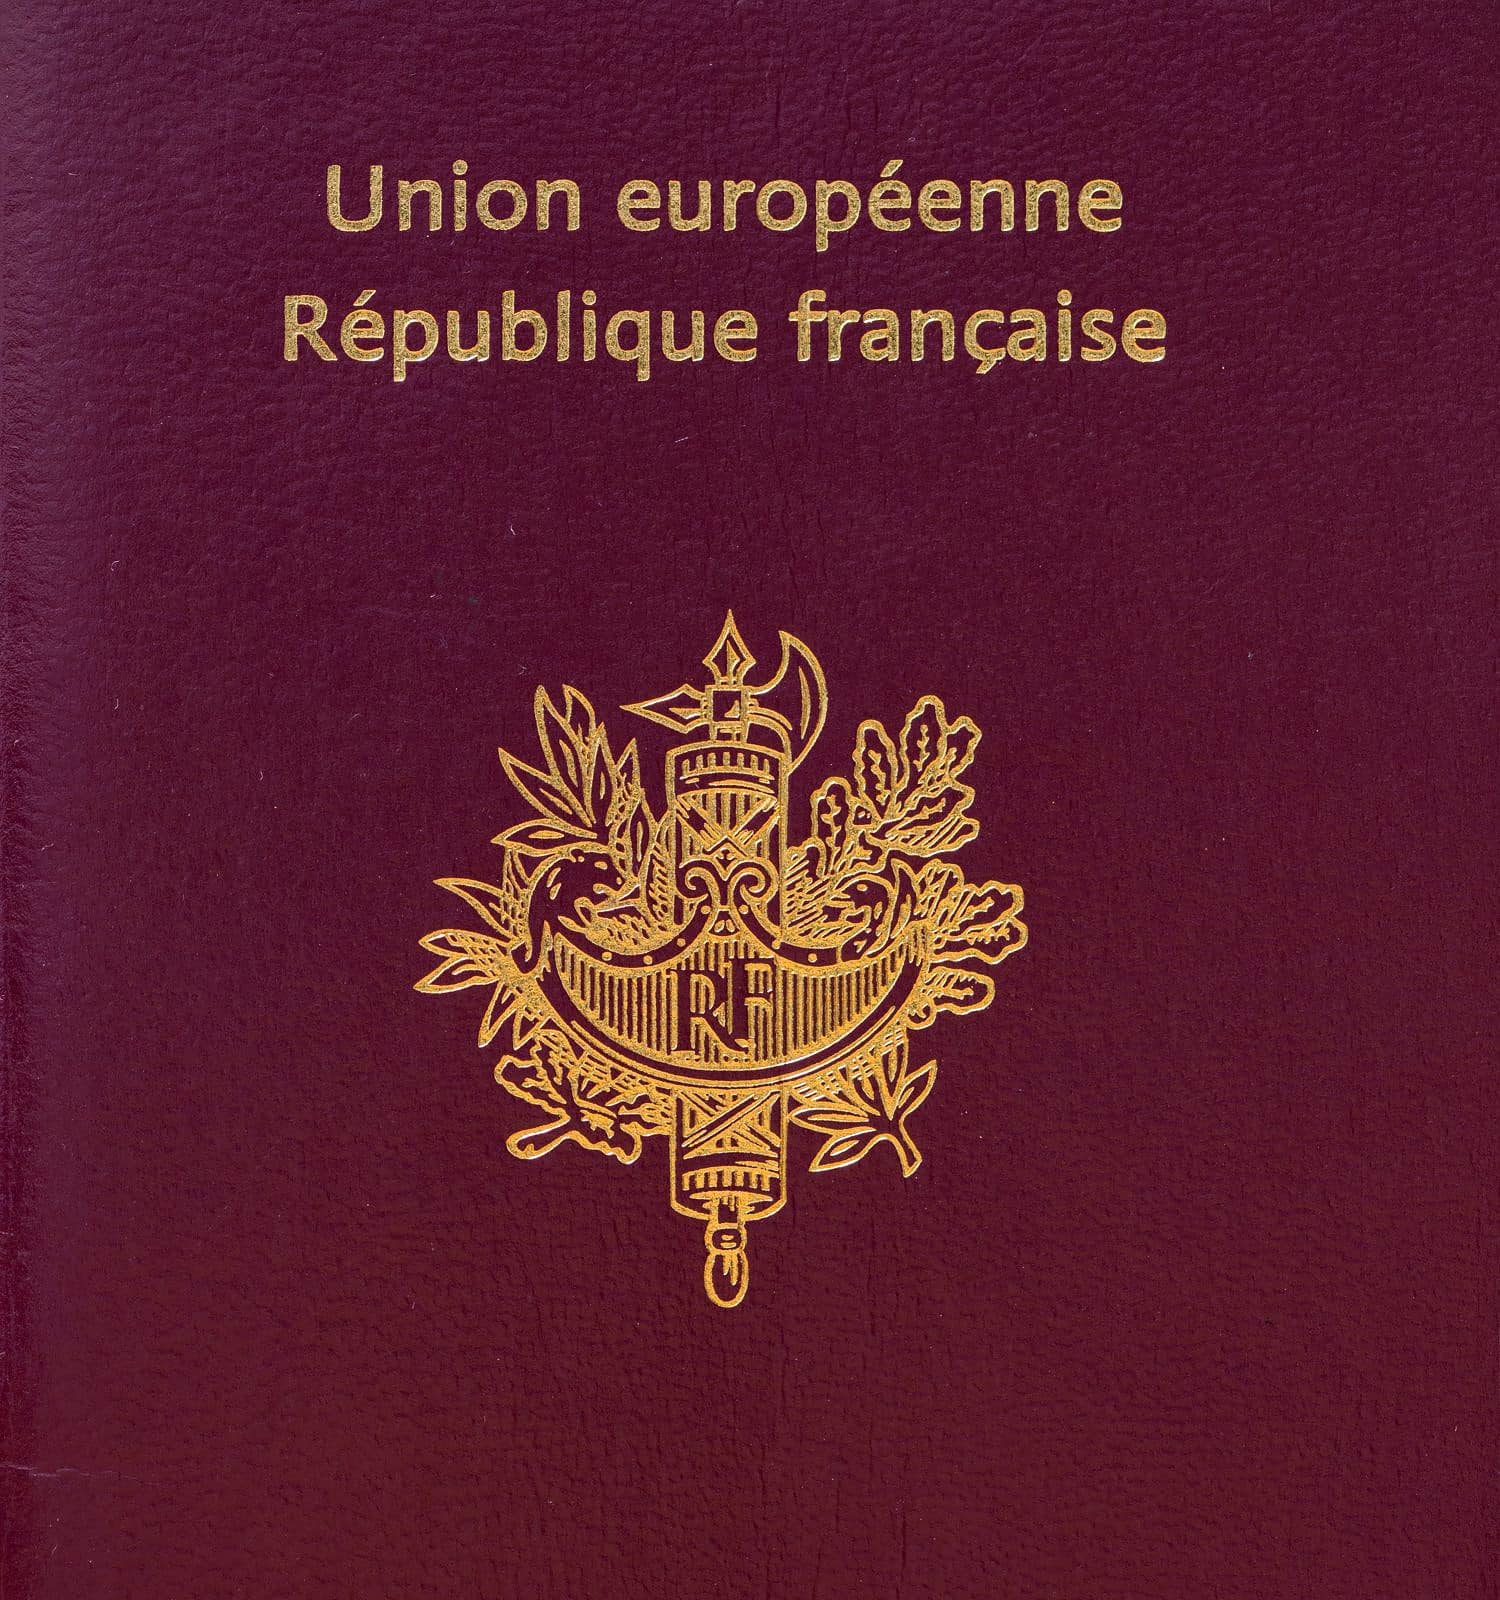 <p>The prestigious first place for the most powerful passport in the world goes to 6 countries: France, Germany, Italy, Japan, Singapore, and Spain. These are some of the most powerful economies in the world. Countries may wish to make it easier for these passport-holders to visit as tourists and businesspeople because of their potential to bring revenue to other countries. In all, citizens with these top-level passports can visit 194 countries visa-free. </p>    <p>So what countries <em>can't </em>these passport holders visit without a visa? Taking France for an example, this would include Afghanistan, Algeria, Azerbaijan, Benin, Bhutan, Cameroon, the Central African Republic, Chad, the Republic of Congo and the Democratic Republic of Congo, Cote d'Ivoire, Cuba, Equatorial Guinea, Eritrea, Ghana, Guinea, India, Liberia, Libya, Mali, Nauru, Niger, Nigeria, North Korea, Papua New Guinea, Russia, Sudan, South Sudan, Syria, Turkmenistan, Uganda, and Yemen. </p><p>Sharks, lions, alligators, and more! Don’t miss today’s latest and most exciting animal news. <strong><a href="https://www.msn.com/en-us/channel/source/AZ%20Animals%20US/sr-vid-7etr9q8xun6k6508c3nufaum0de3dqktiq6h27ddeagnfug30wka">Click here to access the A-Z Animals profile page</a> and be sure to hit the <em>Follow</em> button here or at the top of this article!</strong></p> <p>Have feedback? Add a comment below!</p>